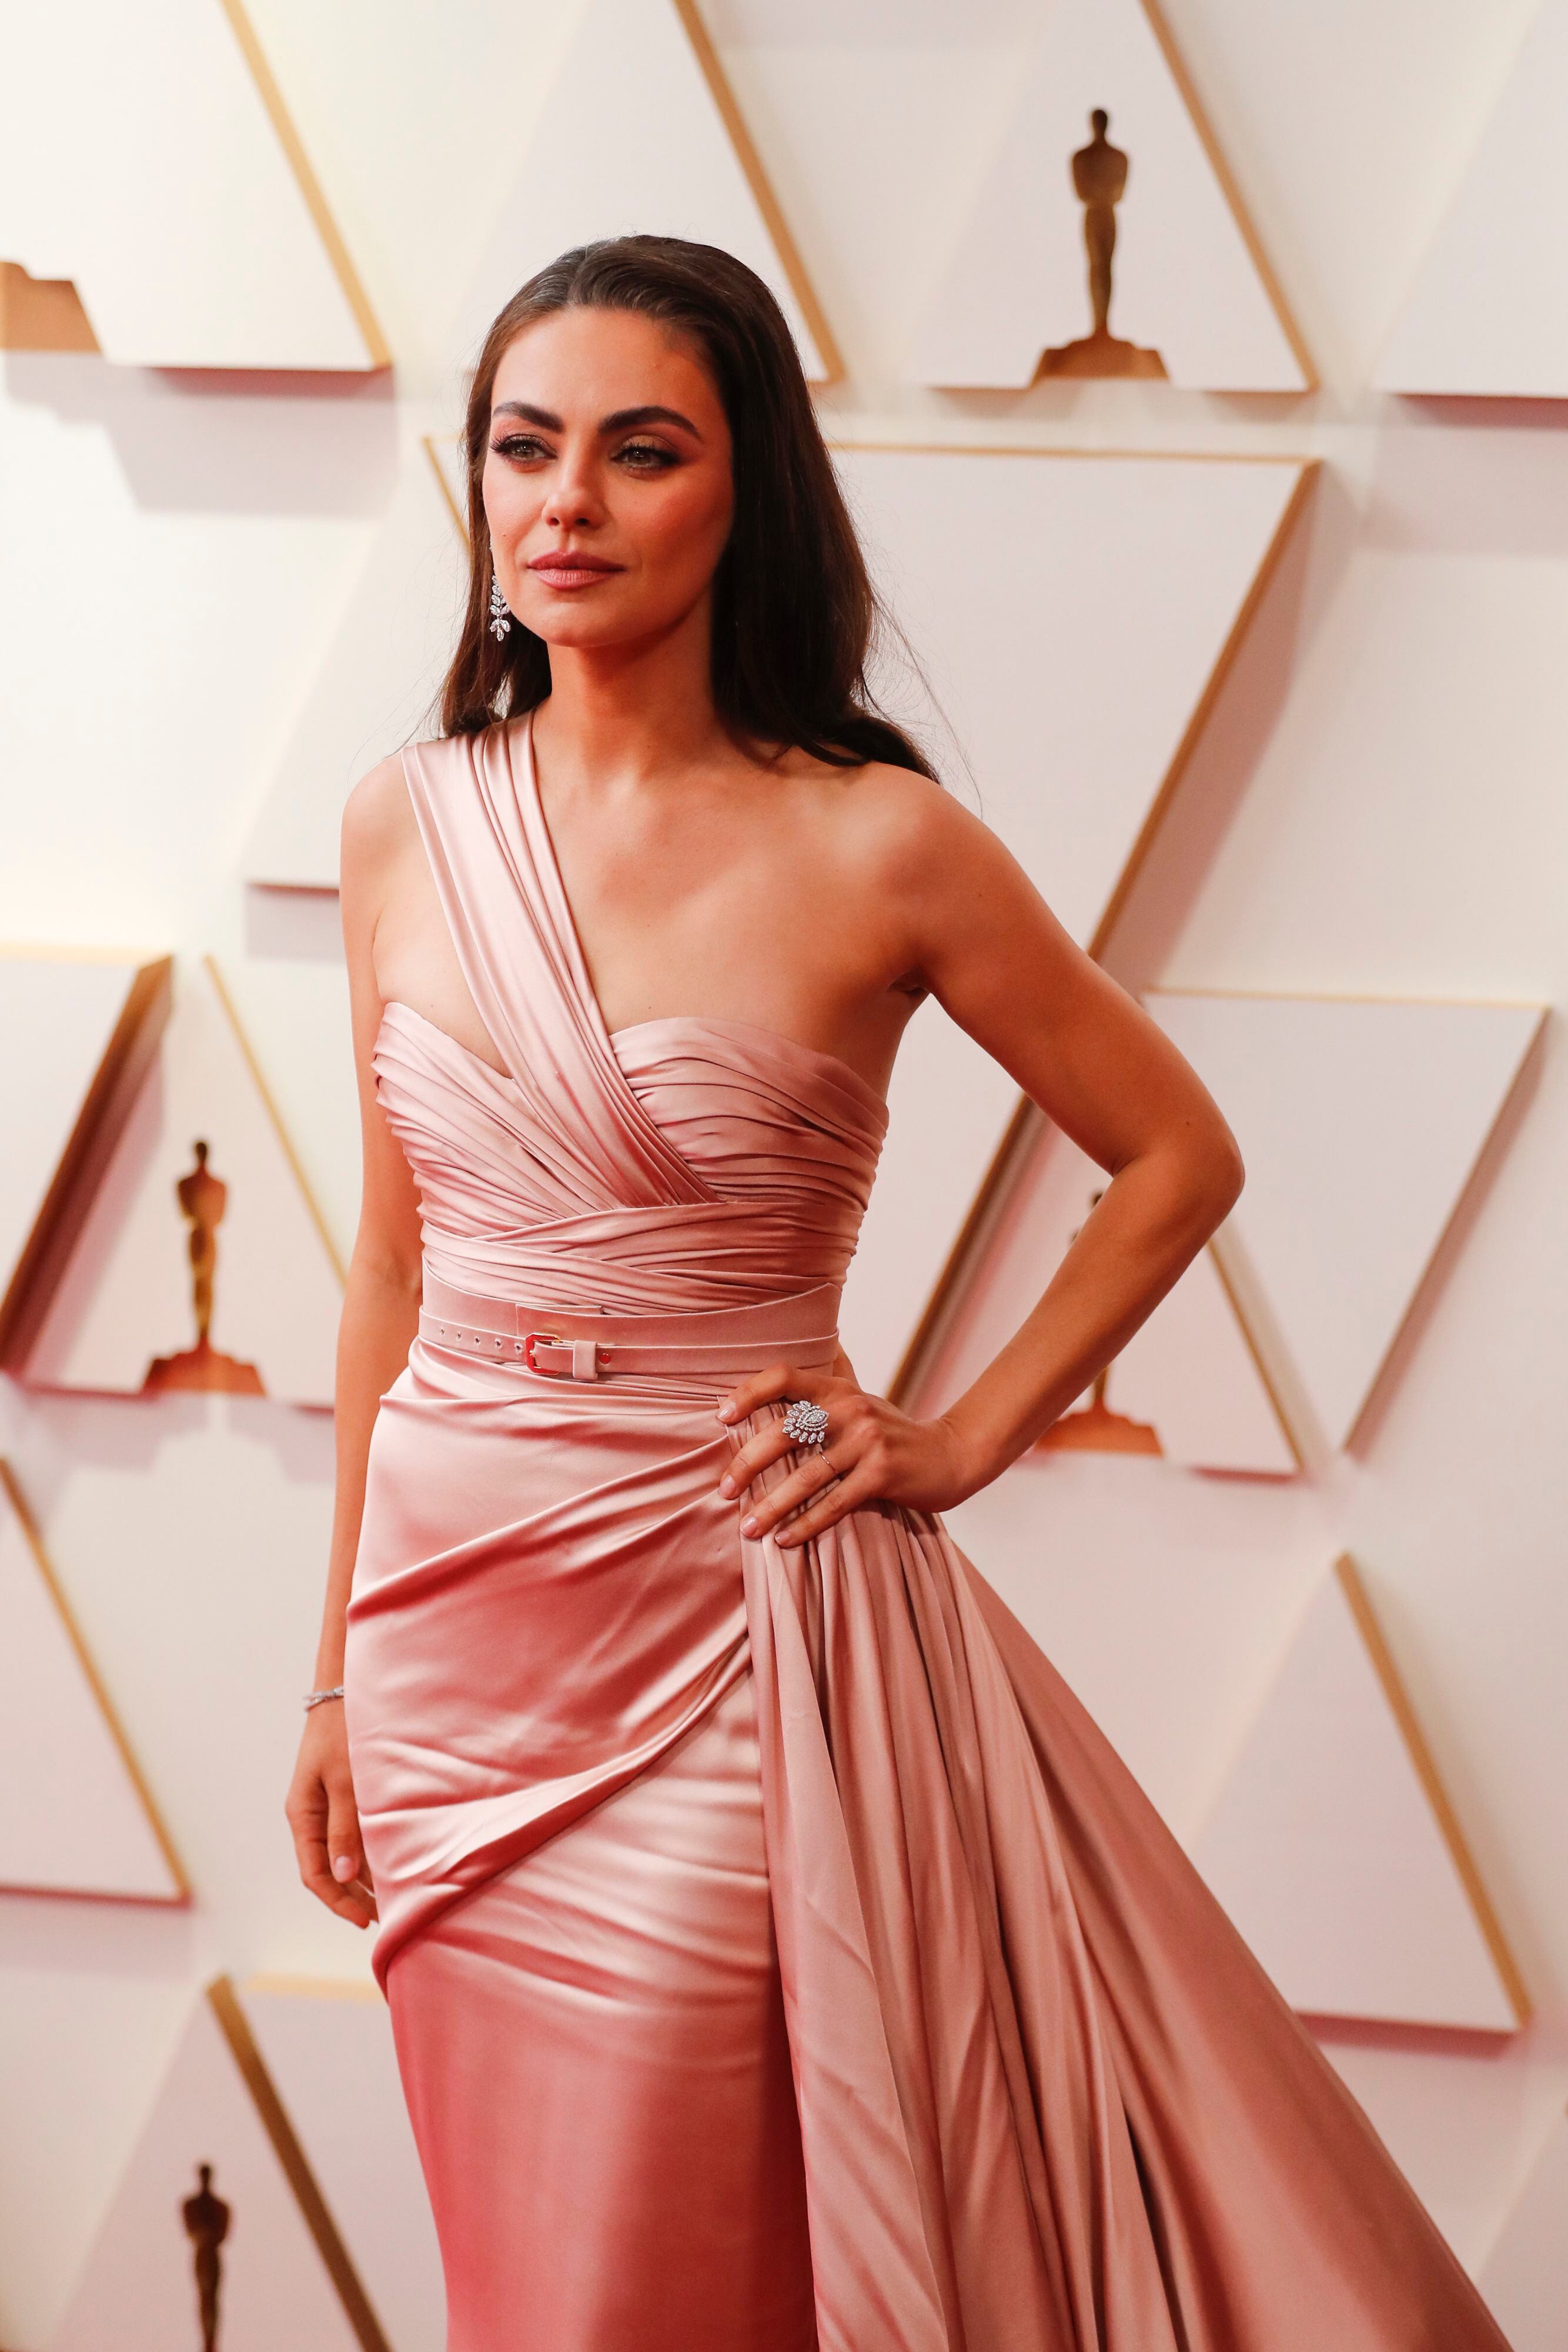 Hollywood (United States), 27/03/2022.- Mila Kunis arrives for the 94th annual Academy Awards ceremony at the Dolby Theatre in Hollywood, Los Angeles, California, USA, 27 March 2022. The Oscars are presented for outstanding individual or collective efforts in filmmaking in 24 categories. (Estados Unidos) EFE/EPA/DAVID SWANSON
